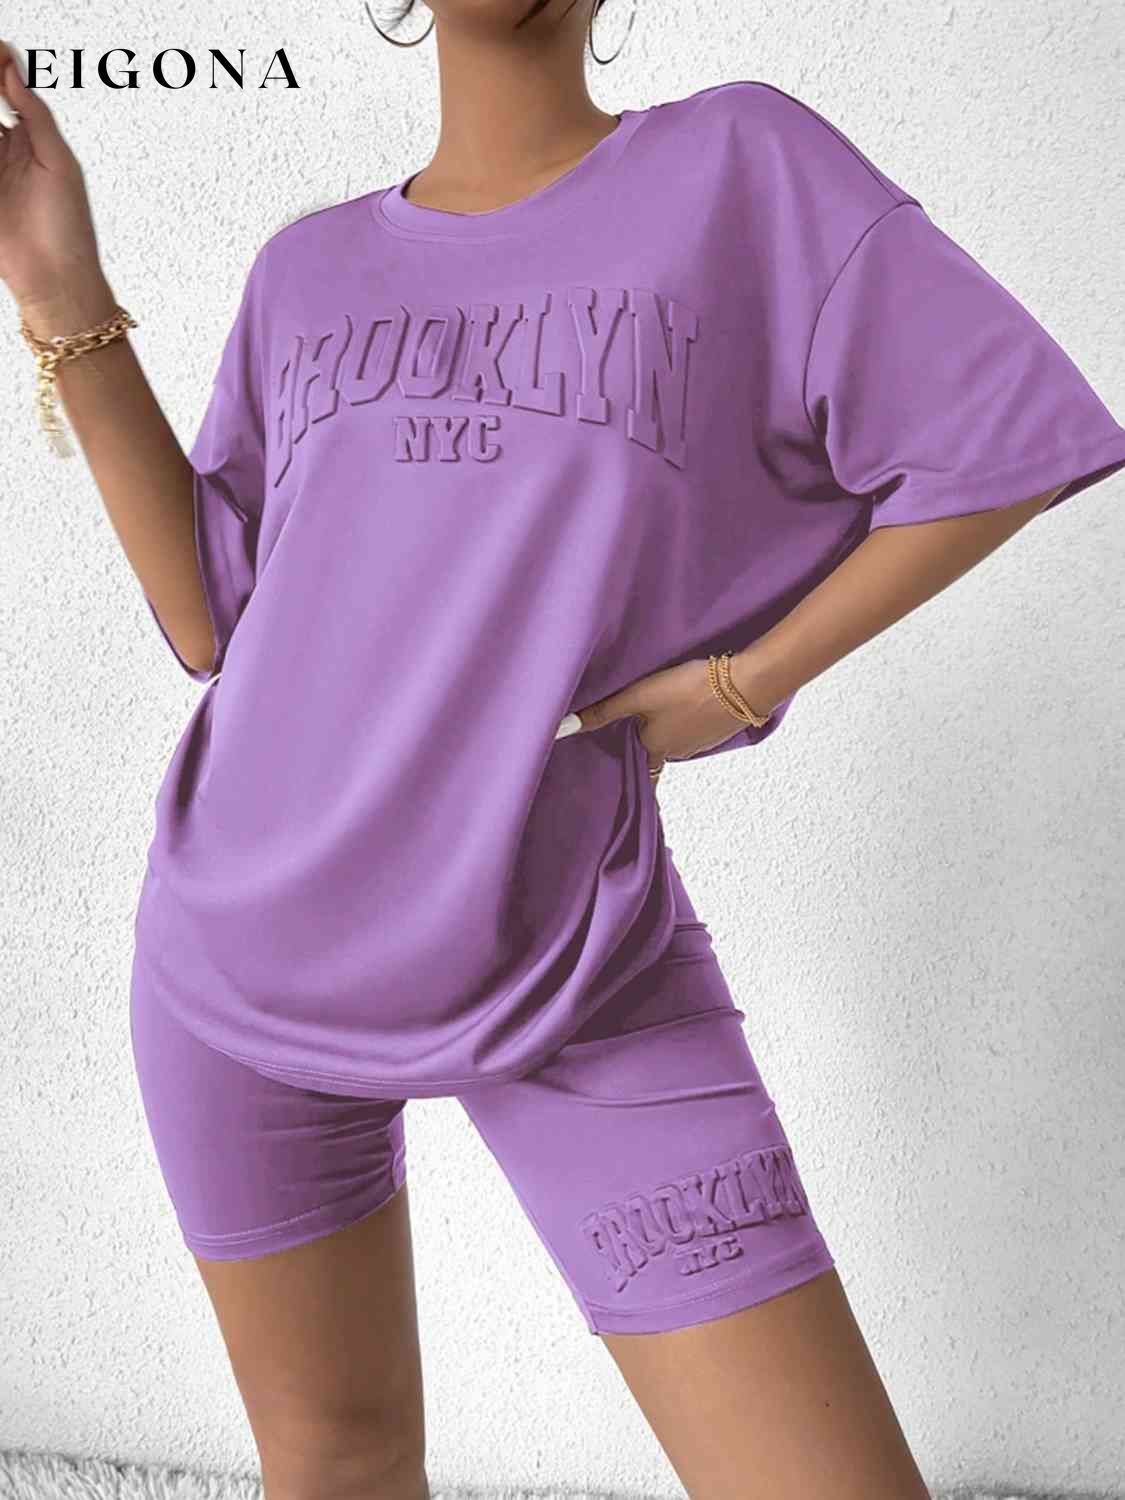 BROOKLYN NYC Graphic Top and Shorts Set Dusty Purple clothes lounge lounge wear lounge wear sets loungewear S&M&Y Ship From Overseas